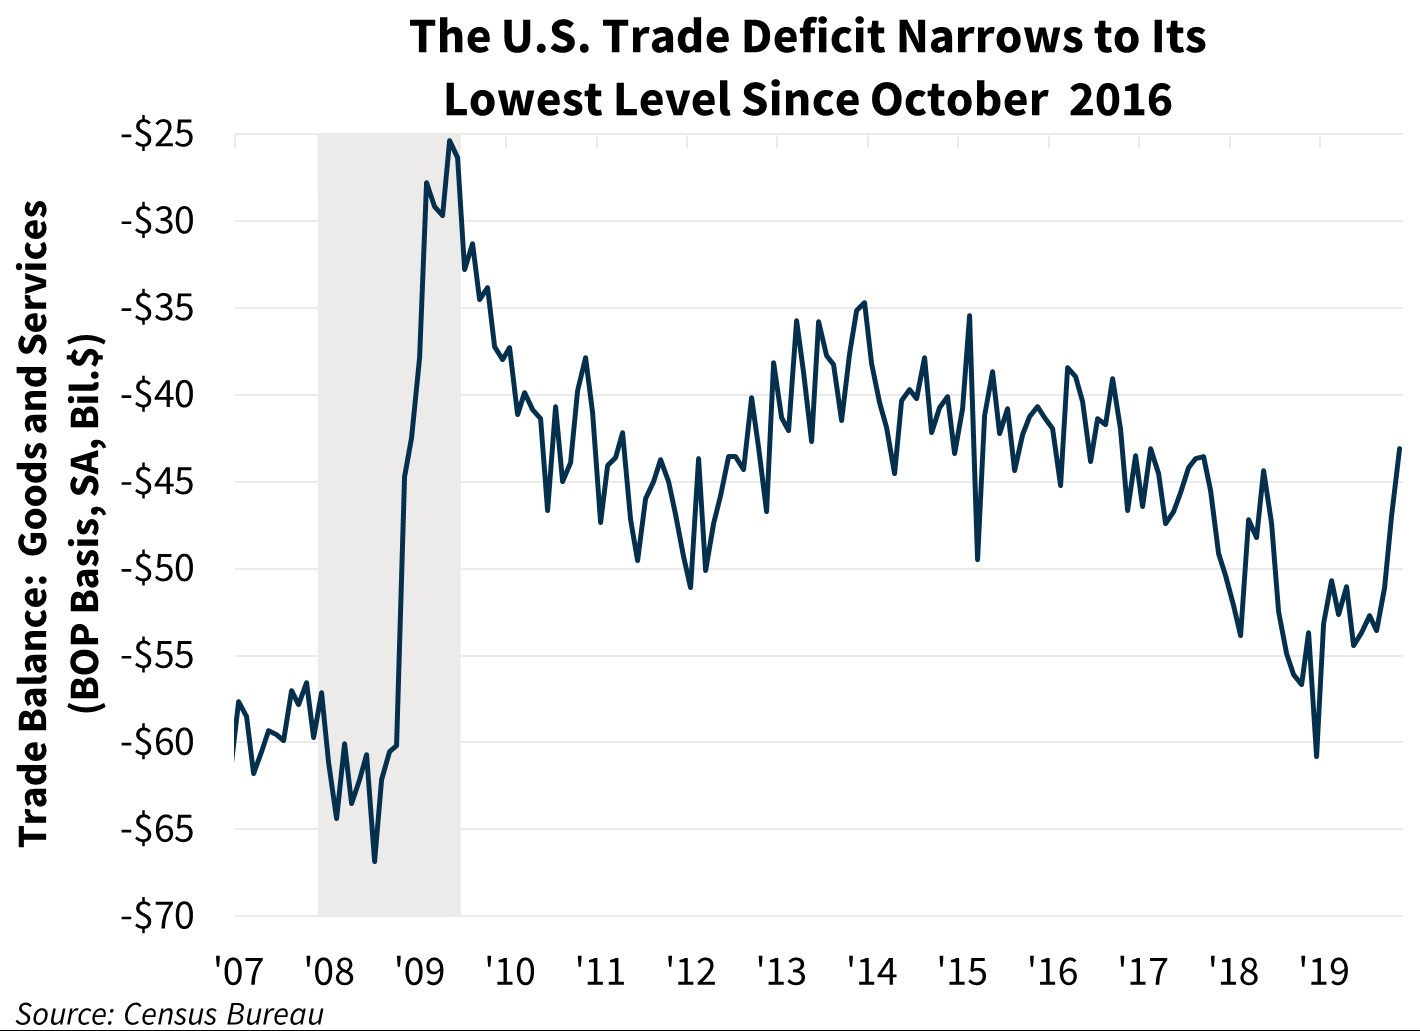 The U.S. Trade Deficit Narrows to Its Lowest Level Since October 2016